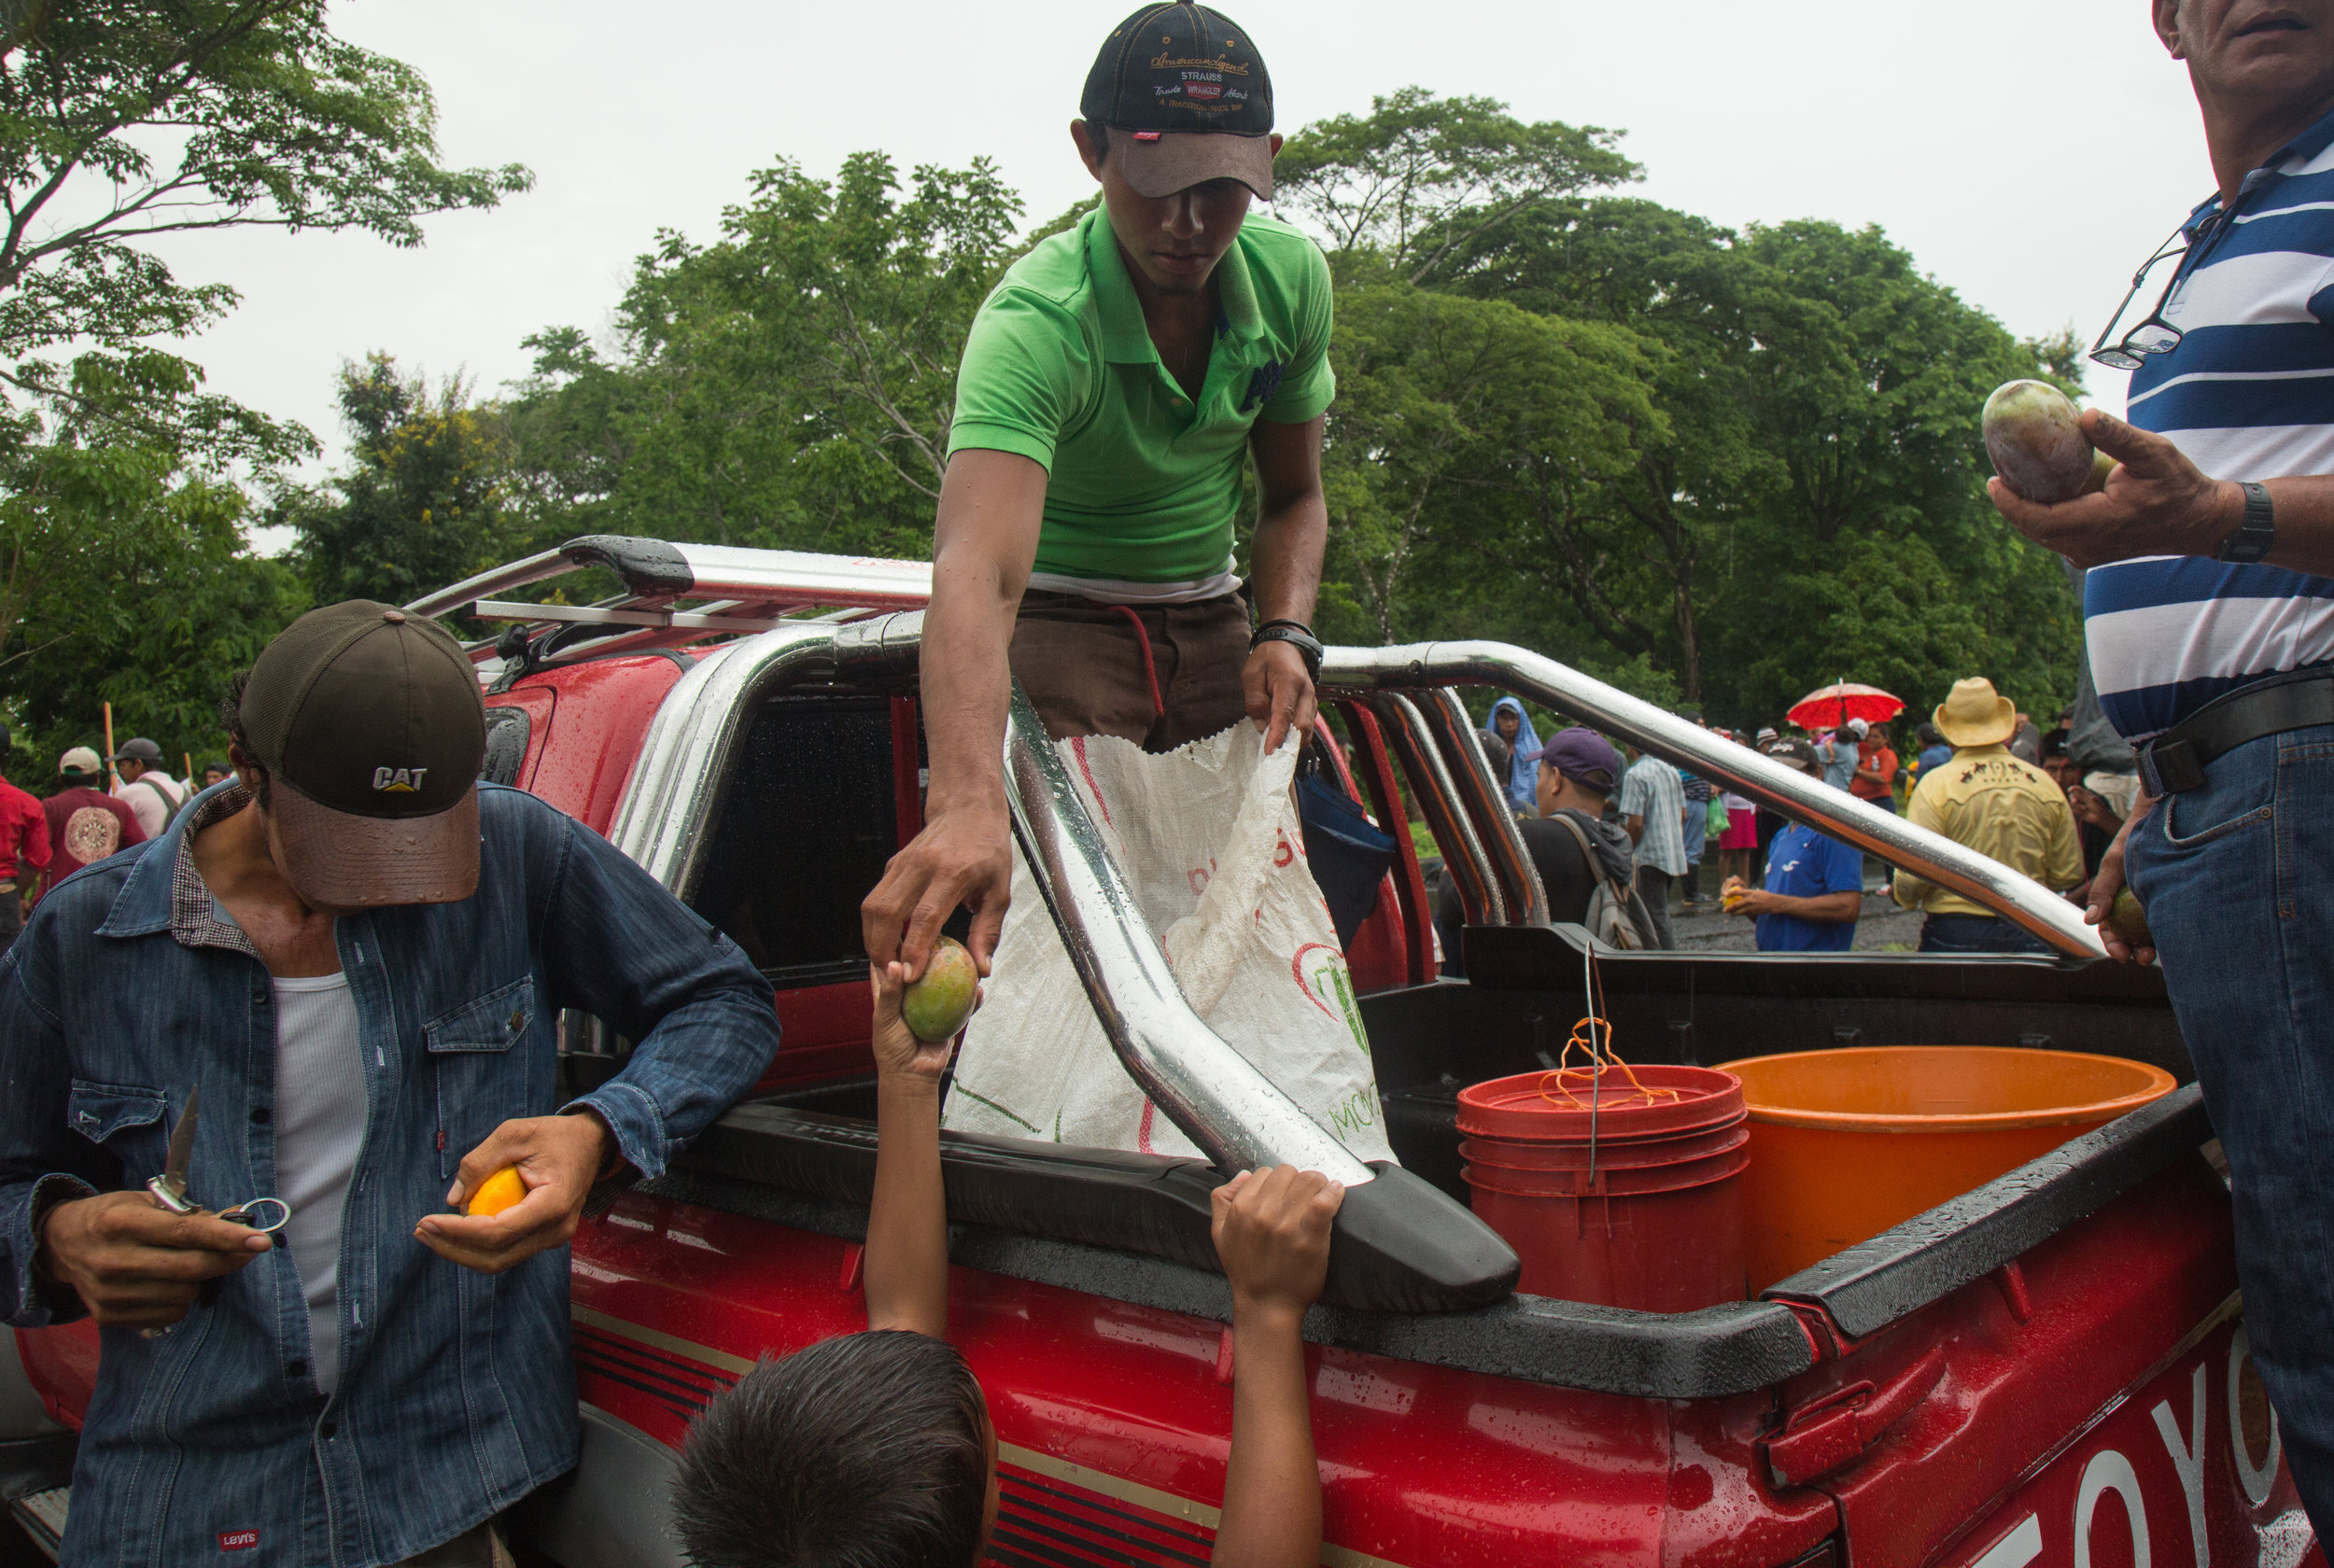  Members of the Consejo Nacional pass out mangos to hungry protesters at a protest against the Ley 840 and the Nicaraguan Canal project which could expropriate tens of thousands of familes' property's most of whom are small farmers, or campesinos. Th